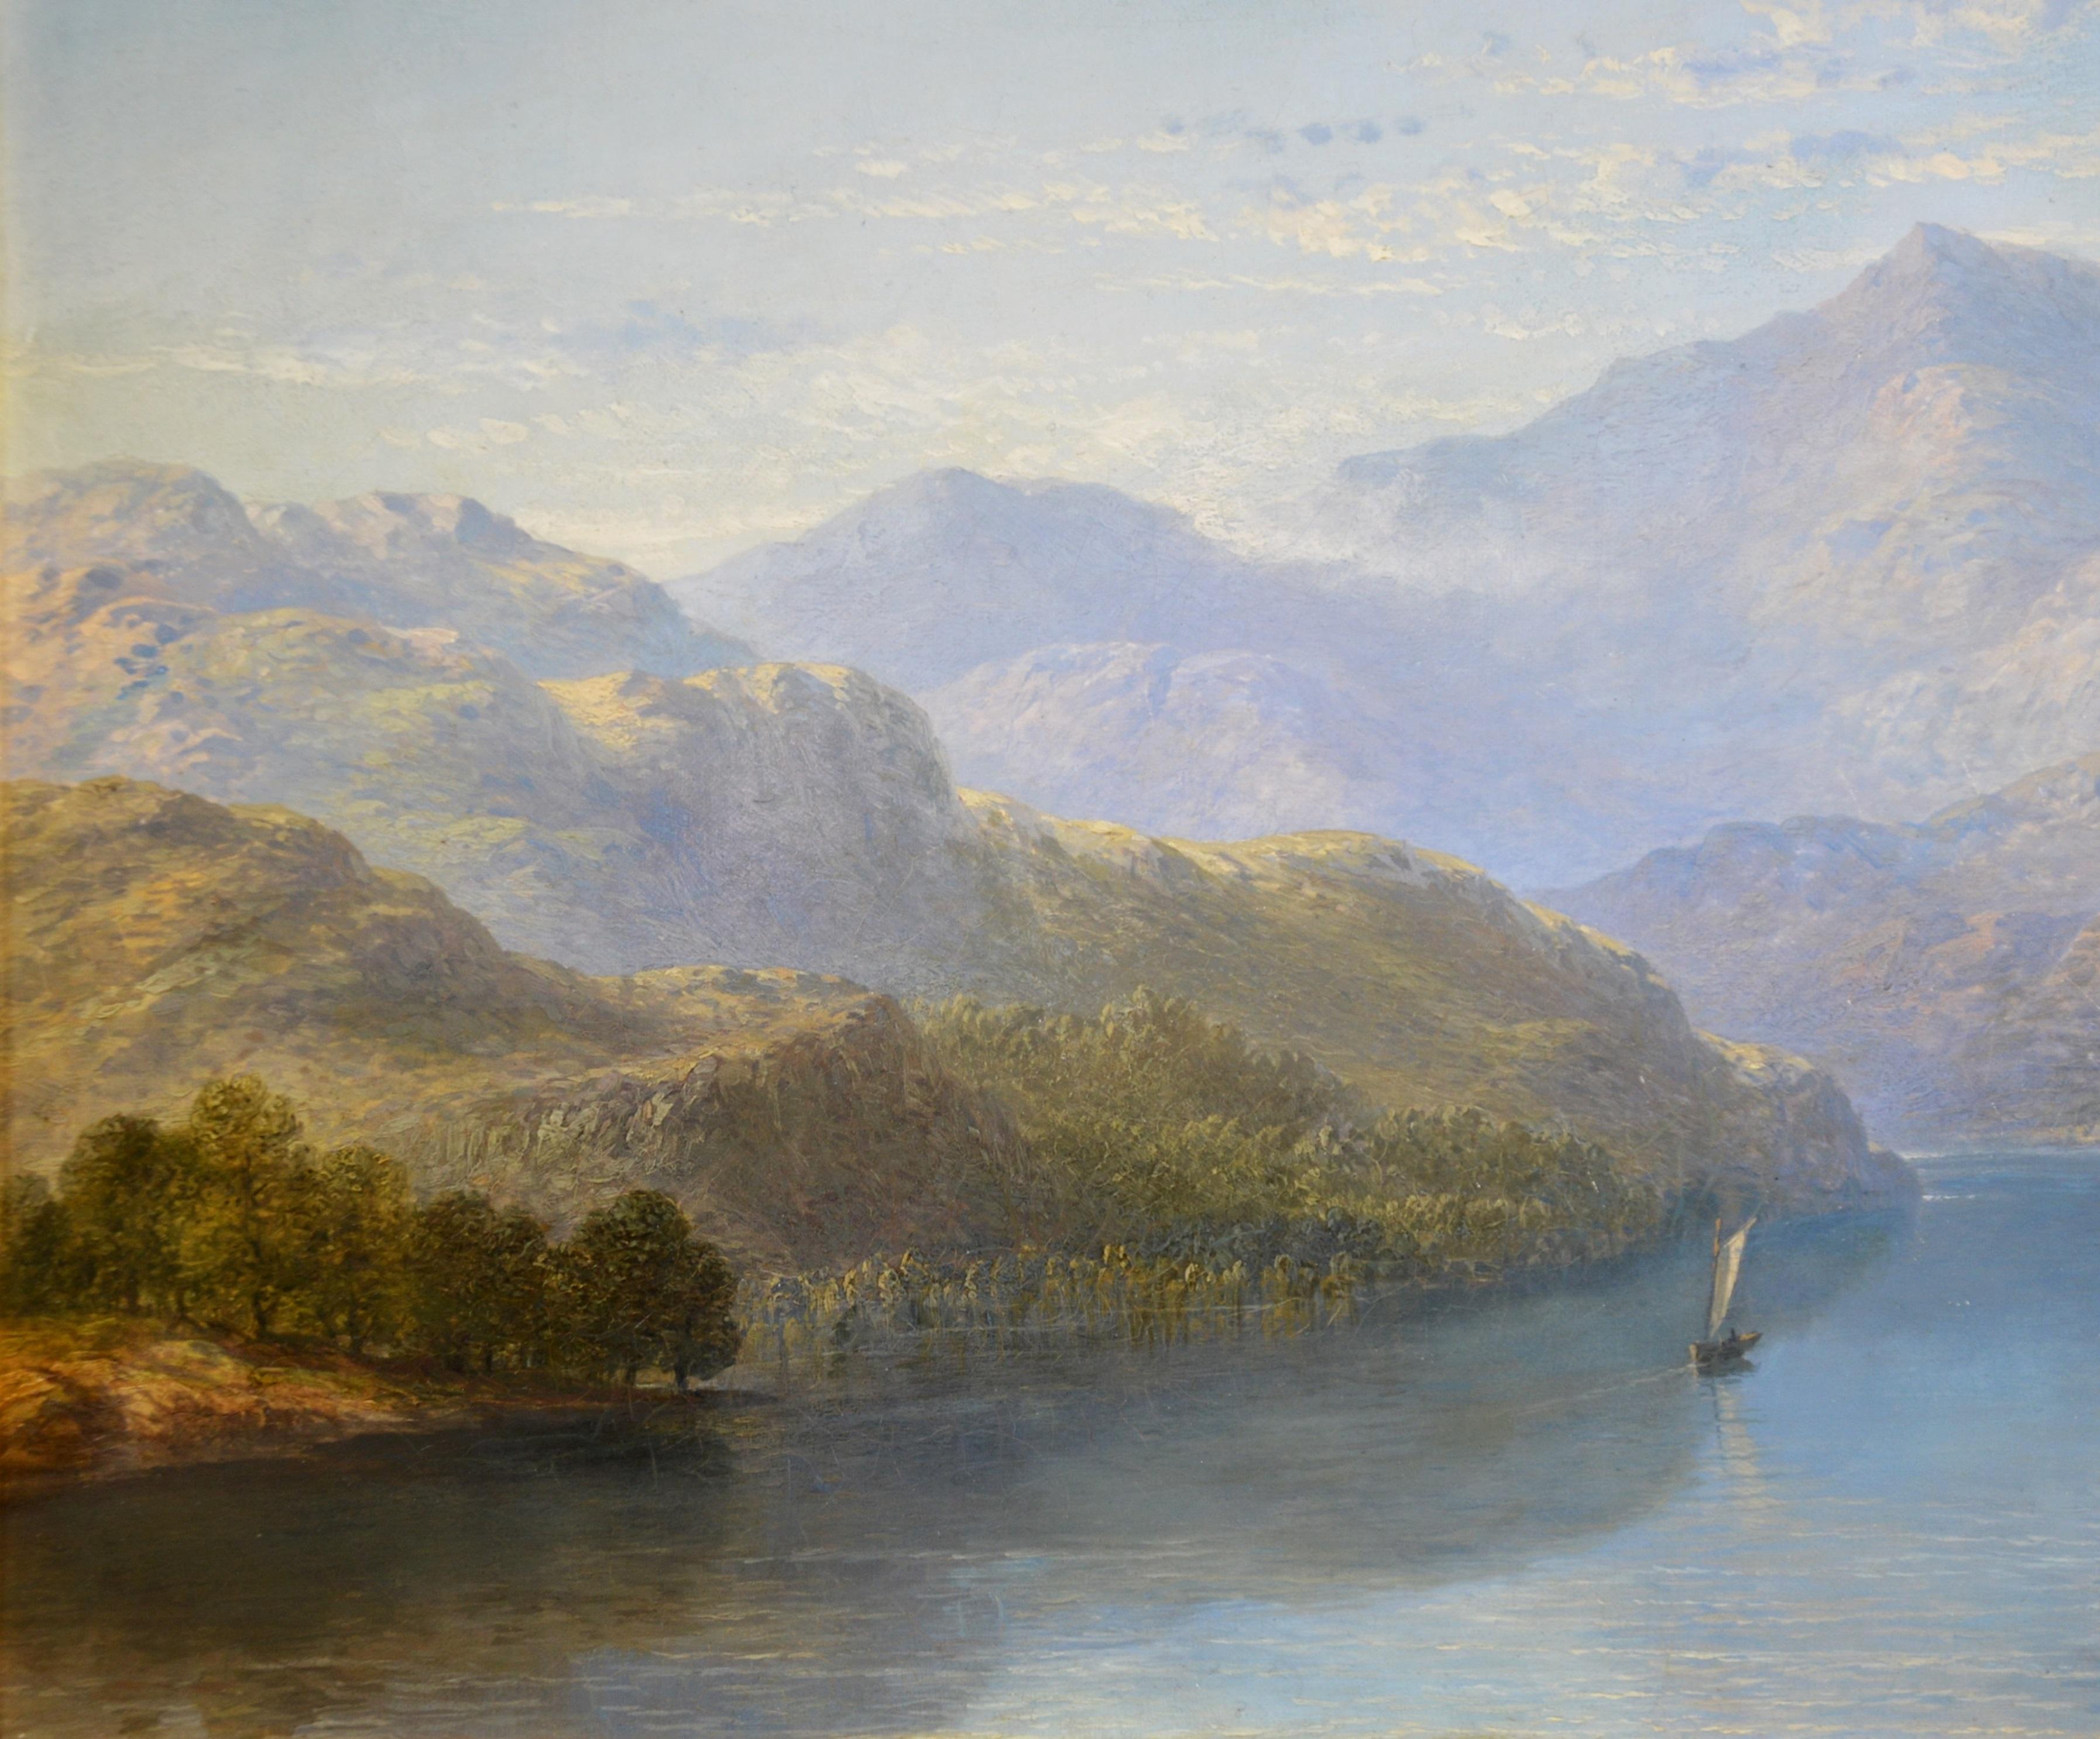 ‘Summertime, Loch Lomond’ by James Poole (1804-1886). 

The painting – which depicts a small group of fishermen a single sailing boat on a summer afternoon in the Scottish Highlands – is signed by the artist and presented in a bespoke gold metal